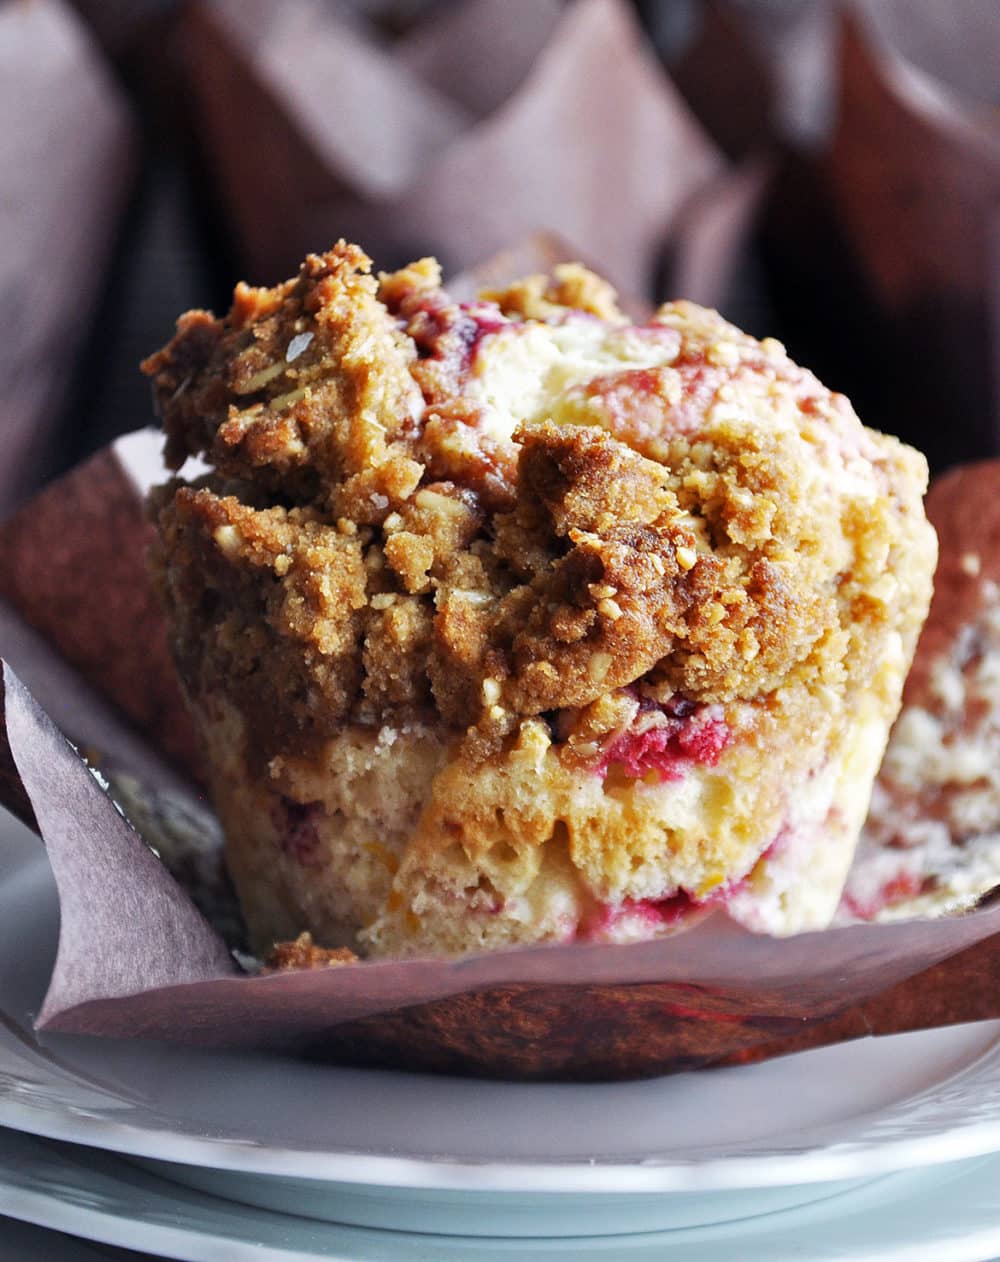 A berry muffin topped with streusel sitting on a table with other muffins in the background. The muffin's paper liner has been pulled back so you can see the entire muffin.